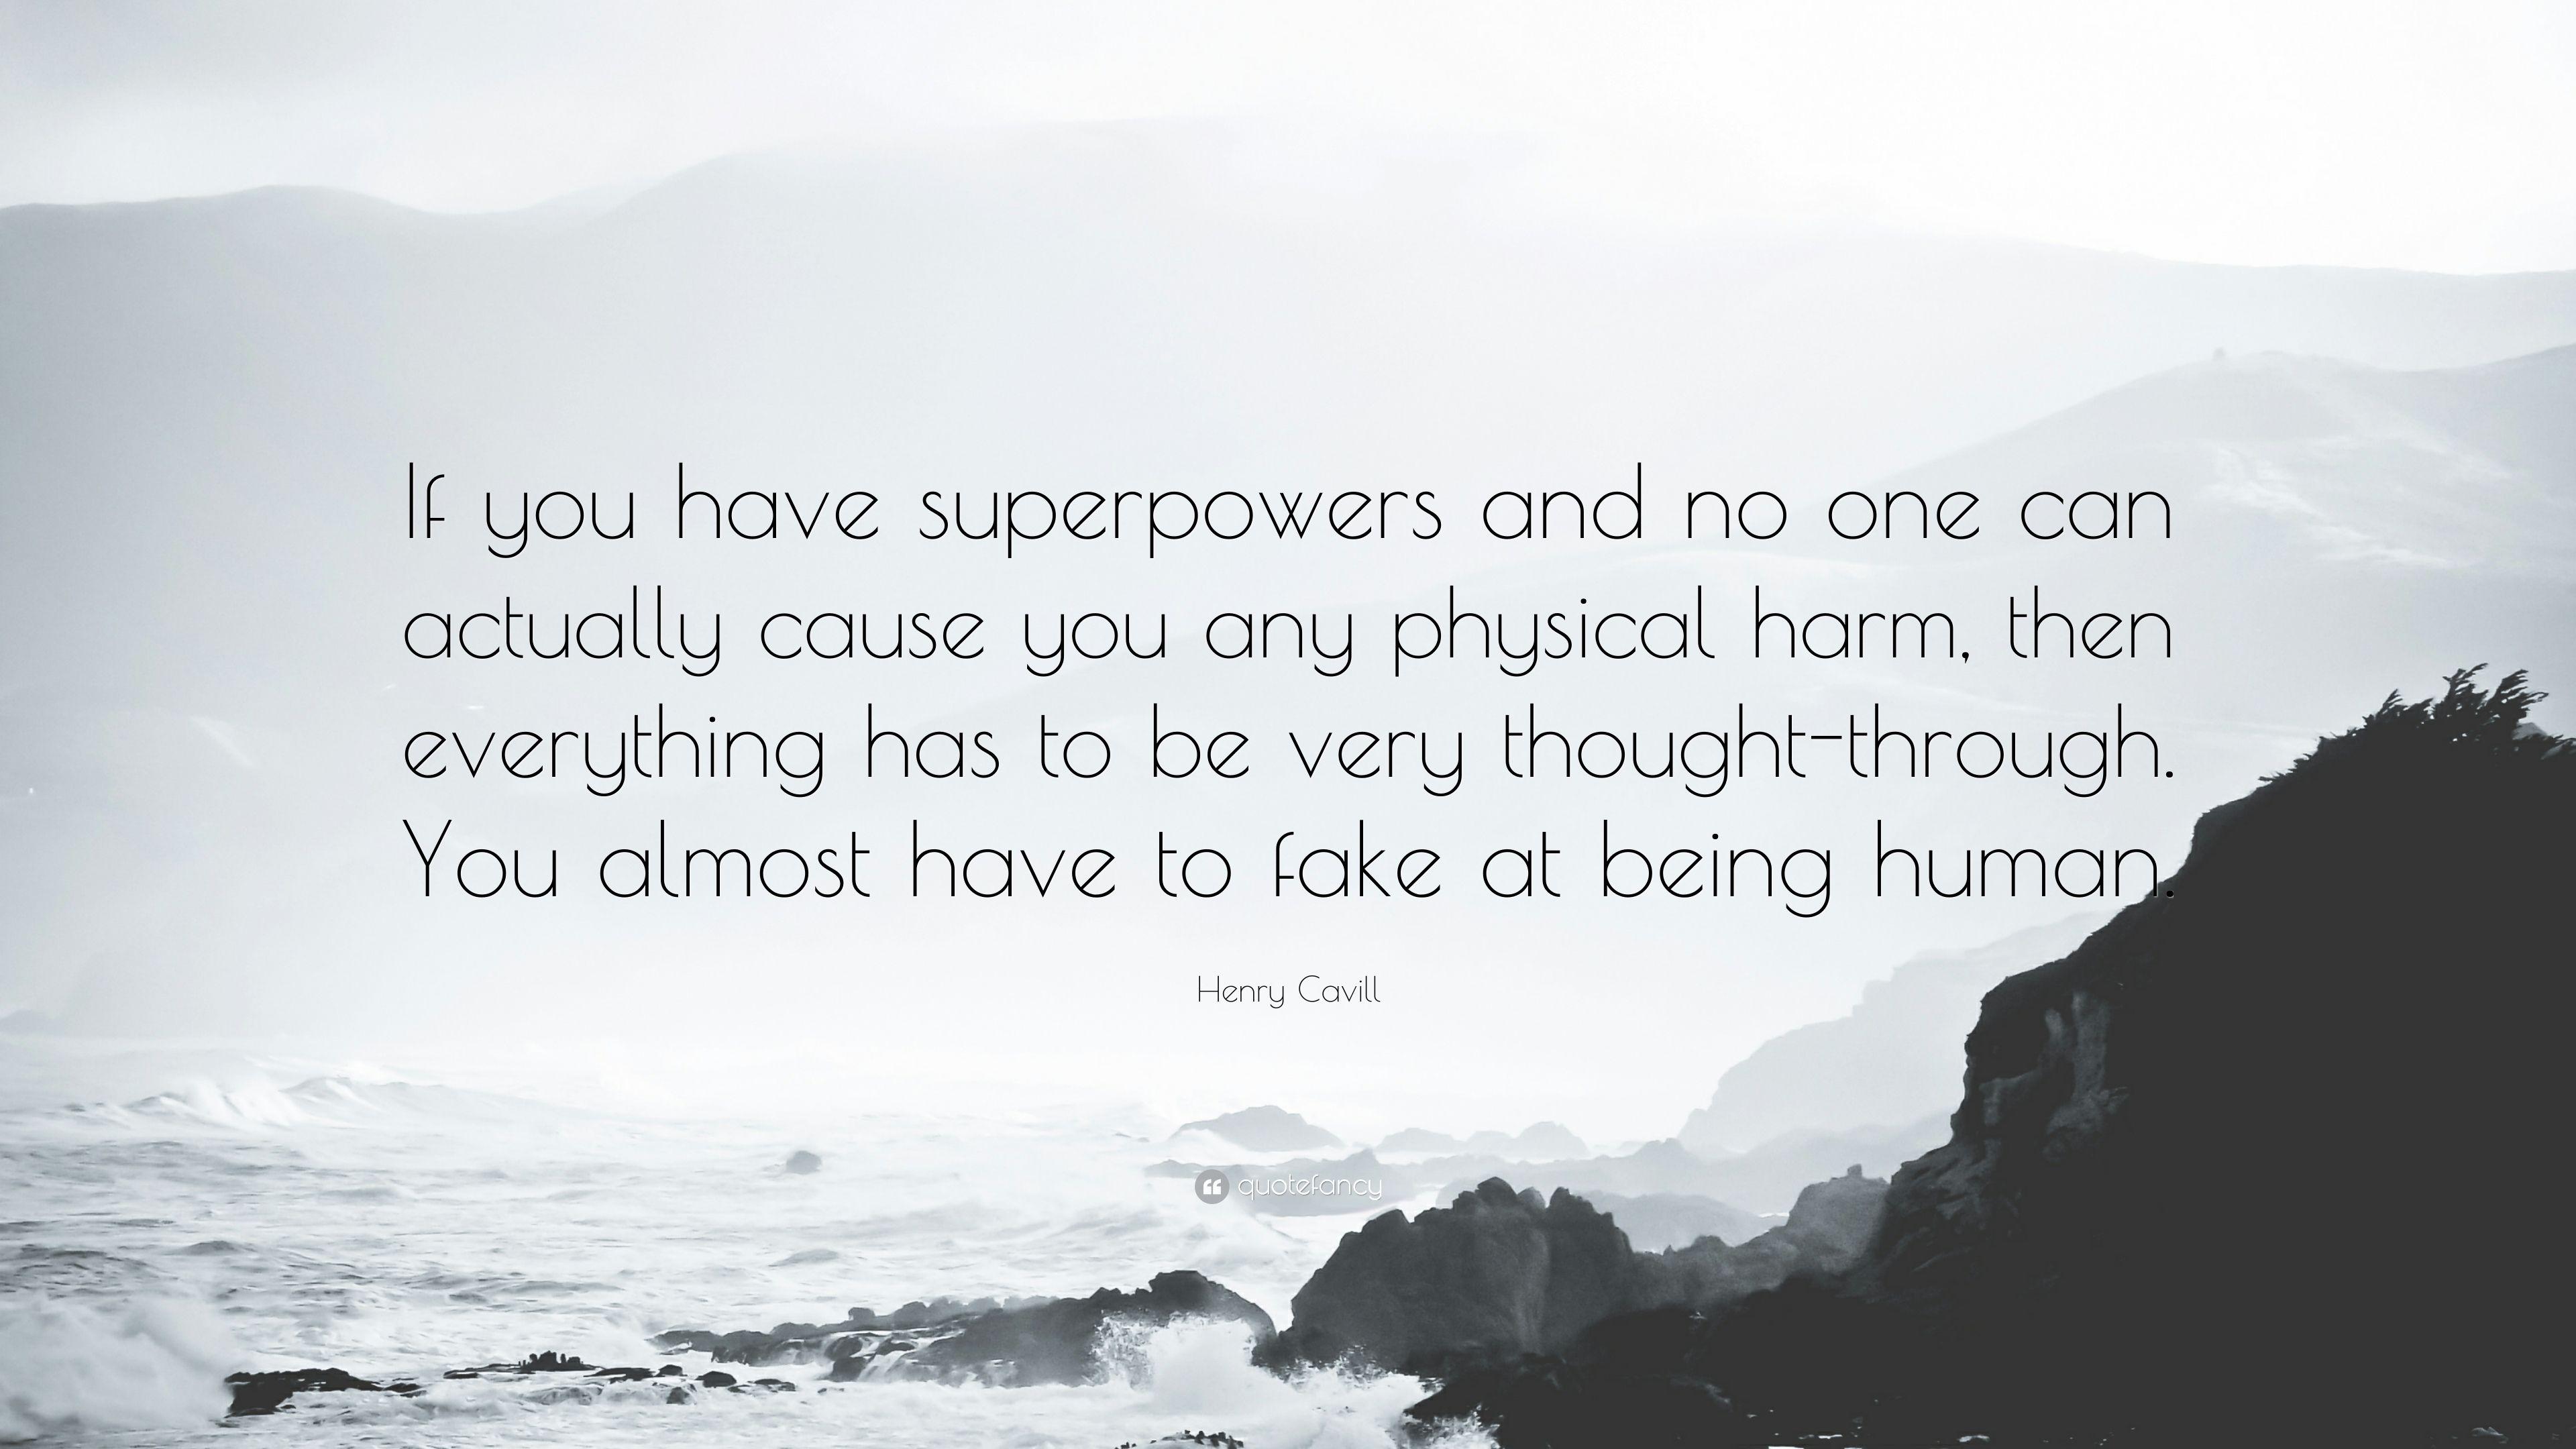 Henry Cavill Quote: “If you have superpowers and no one can actually